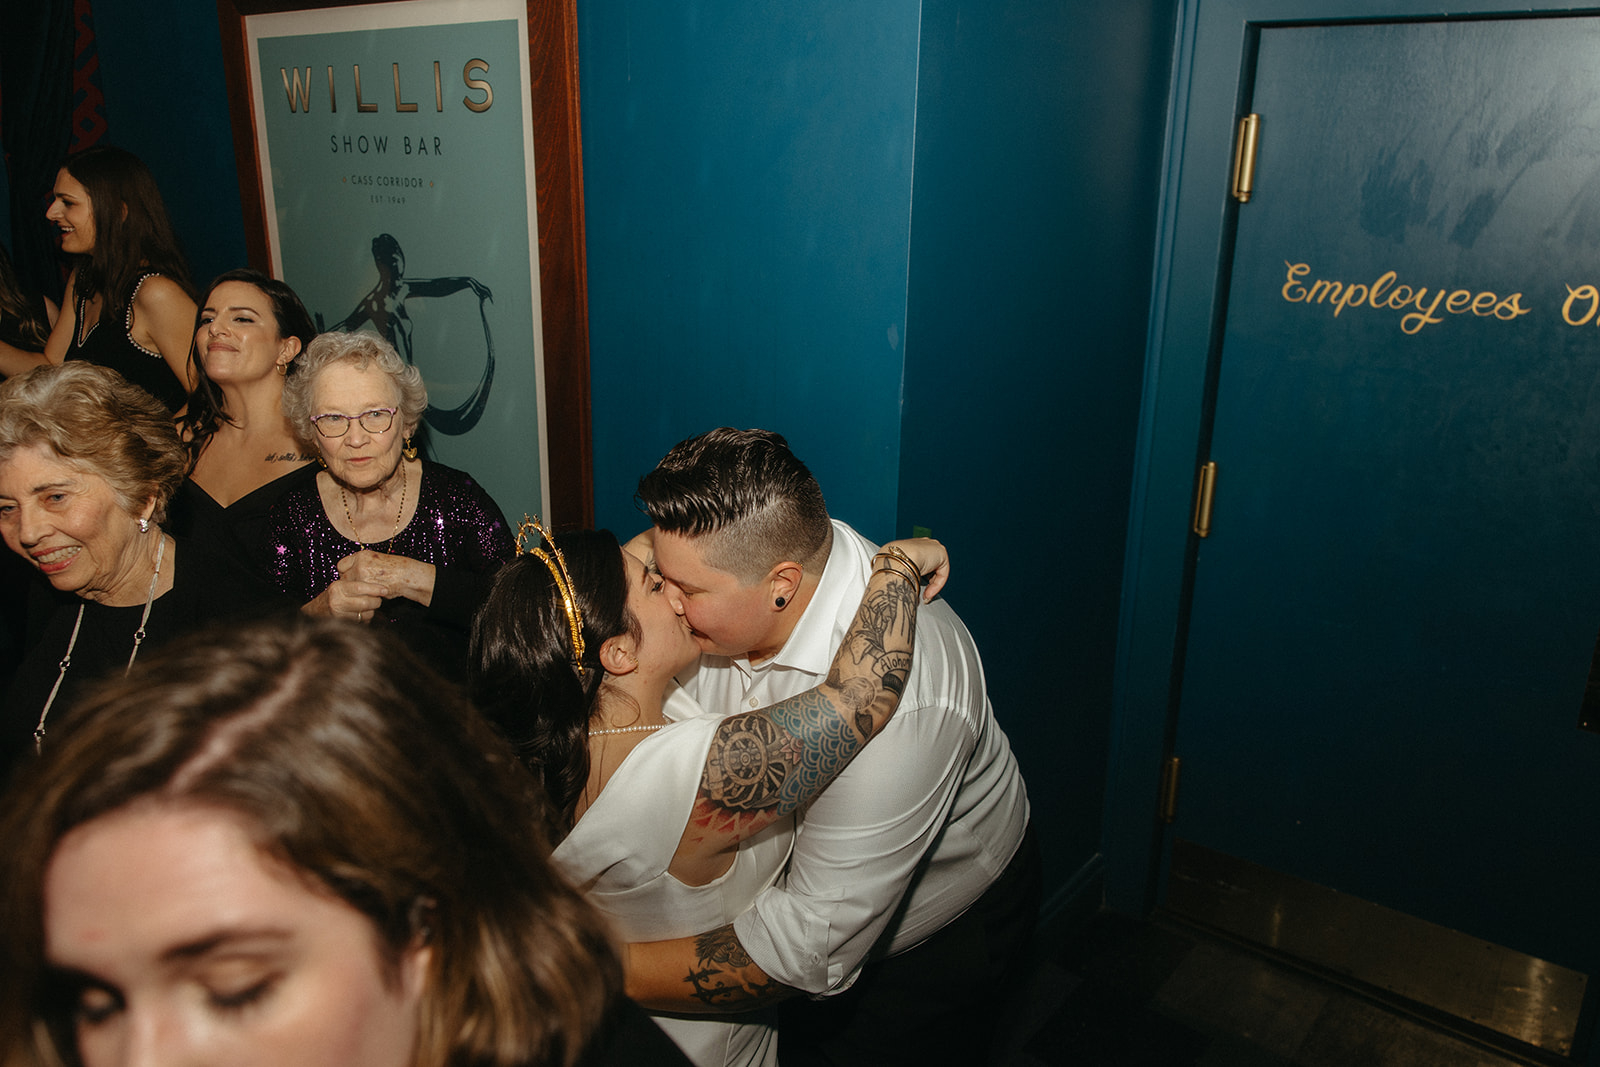 Couple kissing during their Detroit wedding reception at Willis Show Bar